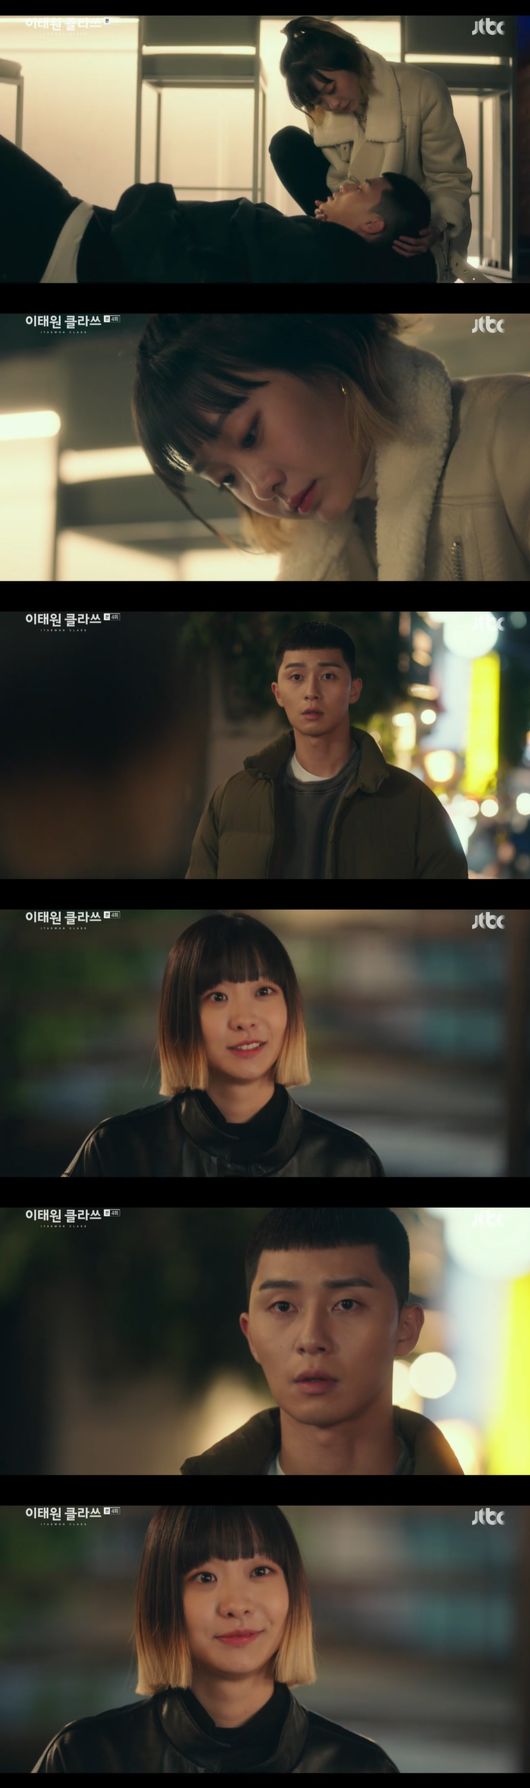 With Itaewon Class Park Seo-joon crushing Kwon Nara for 10 years, the villainous prelude of Kwon Nara and Kim Da-mi opened.In JTBCs Itaewon Class, which aired on the afternoon of the 8th, the narratives of Park Seo-joon (played by Park Sae-roi) and Ryu Kyong-su (played by Choi Seung-kwon) were played.They were prison motives.Itaewon Class Ryu Kyong-su said at the police station, Did not you really know?We are wrong if we know it, recalling Park Seo-joons words, regretting that he received minor Kim Da-mi (Joy Seo station) and Kim Dong-hee (Jang Geun-soo station) as guests.He then recalled the first time he had met Park Seo-joon in prison eight years ago, when the two men who had been in the same room in prison were initially evil.Because they used profanity and violence while revealing each others weaknesses.However, Ryu Kyong-su, who came to the party with Won Hyun-joon (played by Kim Hee-hoon), who was serving as his brother in prison while Park Seo-joon opened the Sanbam bar, said, He and my time were so different.Its cool, she said frankly, Confessions.Also, Ryu Kyong-su directed Park Seo-joon, Live what you want. I want to live like my brother.I do not want to do anything bad and I want to work steadily. He explained the background of working at Short Night .Itaewon Klath An Bo-hyeon (played by Jang Geun-won) visited Yoo Jae-myung (played by Jang Dae-hee) and mentioned the fact that Kim Dong-hee went to the police station a few days ago, saying that the bar is Park Seo-joons store.I am looking forward to your face that is going to be suspended and suspended, said An-hyun.However, Park Seo-joon enjoyed a dinner with Ryu Kyong-su and Lee Ju-young (played by Ma Hyun-yi), as well as making a passionate singing in a karaoke room and making it impossible to think about what was suspended.Kim Da-mi looked for shortnight, looking at the notice reading shortnight at the door, and Kim Da-mi looked meaningful.Later, in the New Year, Kim Da-mi became a 20-year-old adult, legally allowed to enter the bar.He said, I passed all the college applications and became 20 years old.Kim Dong-hee still revealed his crush on Kim Da-mi.Kim Dong-hee sent Kim Da-mi a message to celebrate his 20-year-old anniversary and expected to enjoy a date in the evening, but was disappointed when the reply did not come.Kim Da-mi enjoyed a hunting in a different bar with Friends; unlike Friends in a happy look, he said: Its entrenched.Ive never been interested in anything since I met Park Seo-joon, he thought of Park Seo-joon.The relationship between the three people, Itaewon Klath Park Seo-joon, Kim Da-mi and Kwon Nara, also began: Kim Da-mi, who met the truth at a hunting bar.He ran away with his cheeks hit and accidentally met Park Seo-joon in the mens bathroom.Kim Da-mi said, Help me? I can not do anything if you do not say help here.Park Seo-joon ran away with Kim Da-mis hand, and joined Kwon Nara, who was enjoying dating with Park Seo-joon, so the three people went to drink coffee.Kim Da-mi decided to unveil her own SNS marketing secrets to help promote Park Seo-joons store.But while Park Seo-joon went to get coffee, Kim Da-mi and Kwon Naras nervous breakdown unfolded.In particular, Kim Da-mi told Kwon Nara, who seemed to know him despite the first time, How come Im not suspended because of me, did you report it?Kim Da-mis fact violence, Kwon Nara said, There is no hope for you anyway.But if you know that your sister is a huge person, will not it change a little? Dont worry, its just a literal attraction, he added.Eventually Kwon Nara confessed his fault to Park Seo-joon, who said: New Roy, the person who called your store police, thats me, is it still good for me?, but rather than be angry, Park Seo-joon said, Yes, there must have been a reason. If you dont tell me, I dont know.Im just a little sad, he said, making Kim Da-mi wonder.Itaewon Class Kim Da-mi forced Park Seo-joon to have a drink because of SNS marketing secrets.Two people who had a deep conversation at the bar where Namsan Tower was seen.Park Seo-joon has been honest with Kim Da-mi about his past from the background of opening Sanbam.Kim Da-mi looked at Park Seo-joon faintly and suggested that his love for him grew even bigger.Kim Da-mi later Kissed Park Seo-joon, who fell drunk and said, I want to make his bitter night sweet.The next day, Kim Da-mi, who found Park Seo-joon, said: As soon as I see it, I realize it.I did not have to worry, he said, What is going on here in Park Seo-joons words, I want to be with you .Kim Da-mi then said, Im working here. Ill make a dream come true, boss. Ill make a great person.JTBC Itaewon Class captures broadcast screen